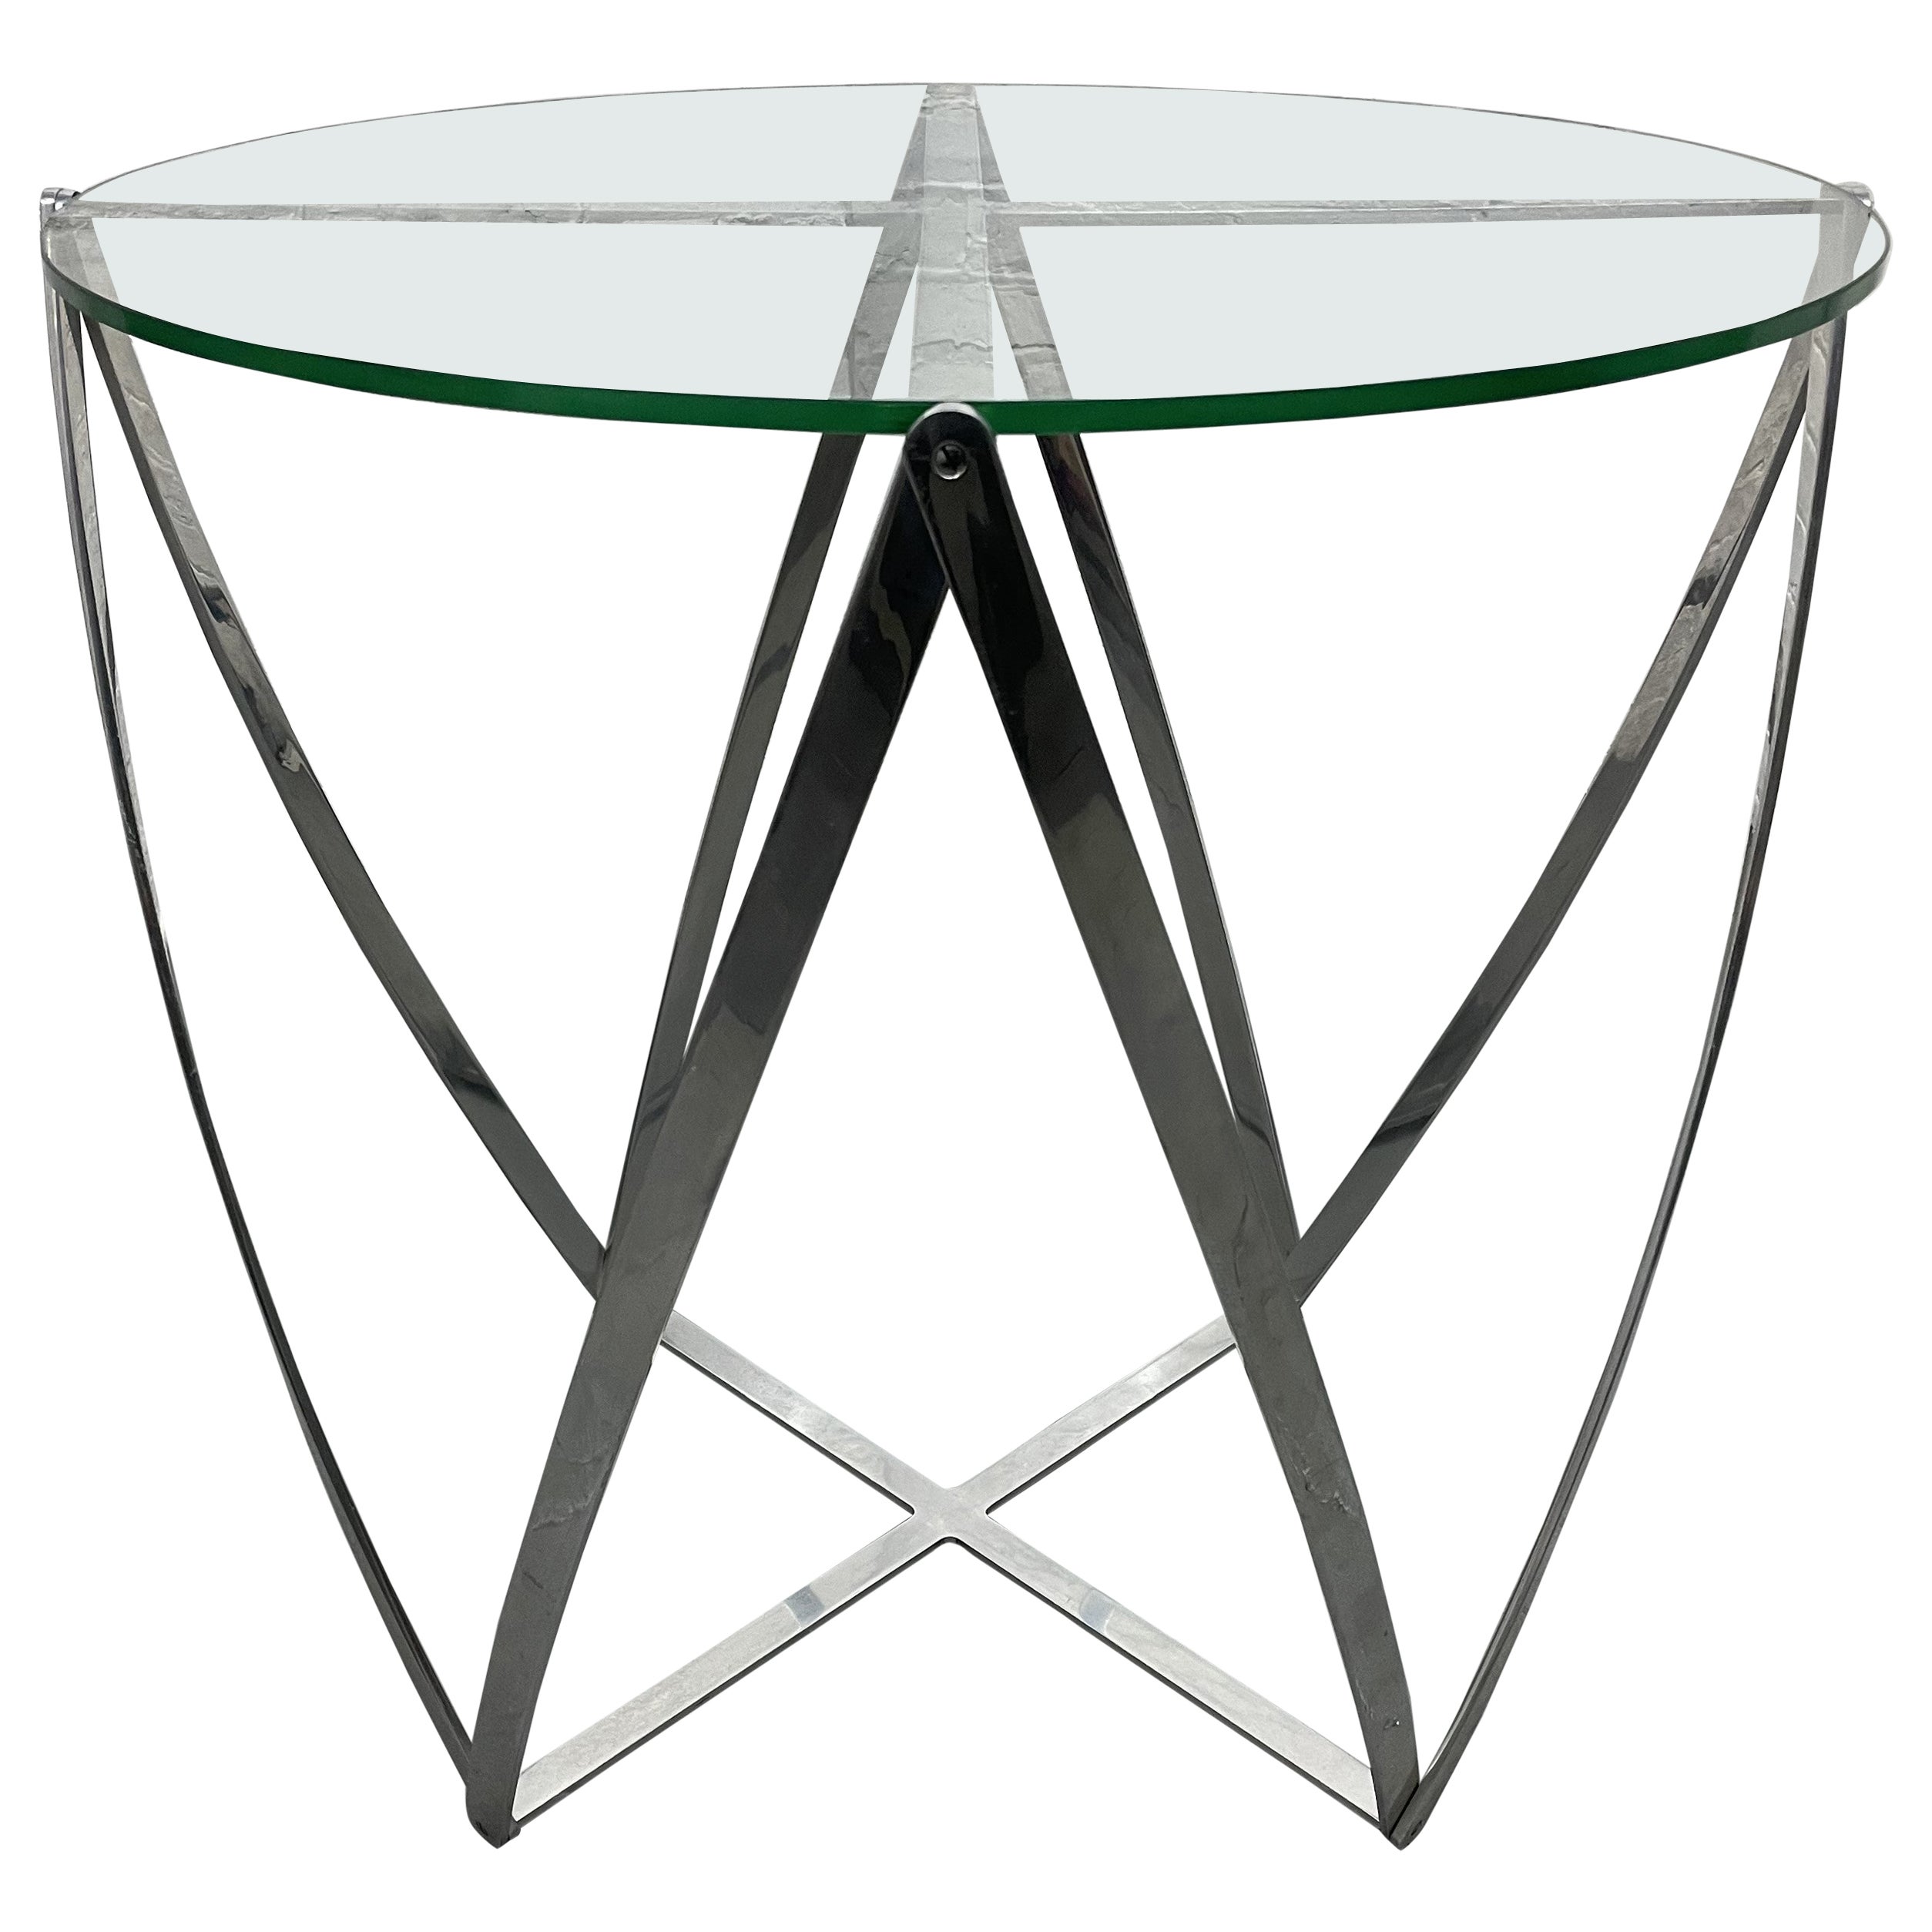 John Vesey Aluminum and Glass Spool Side Table